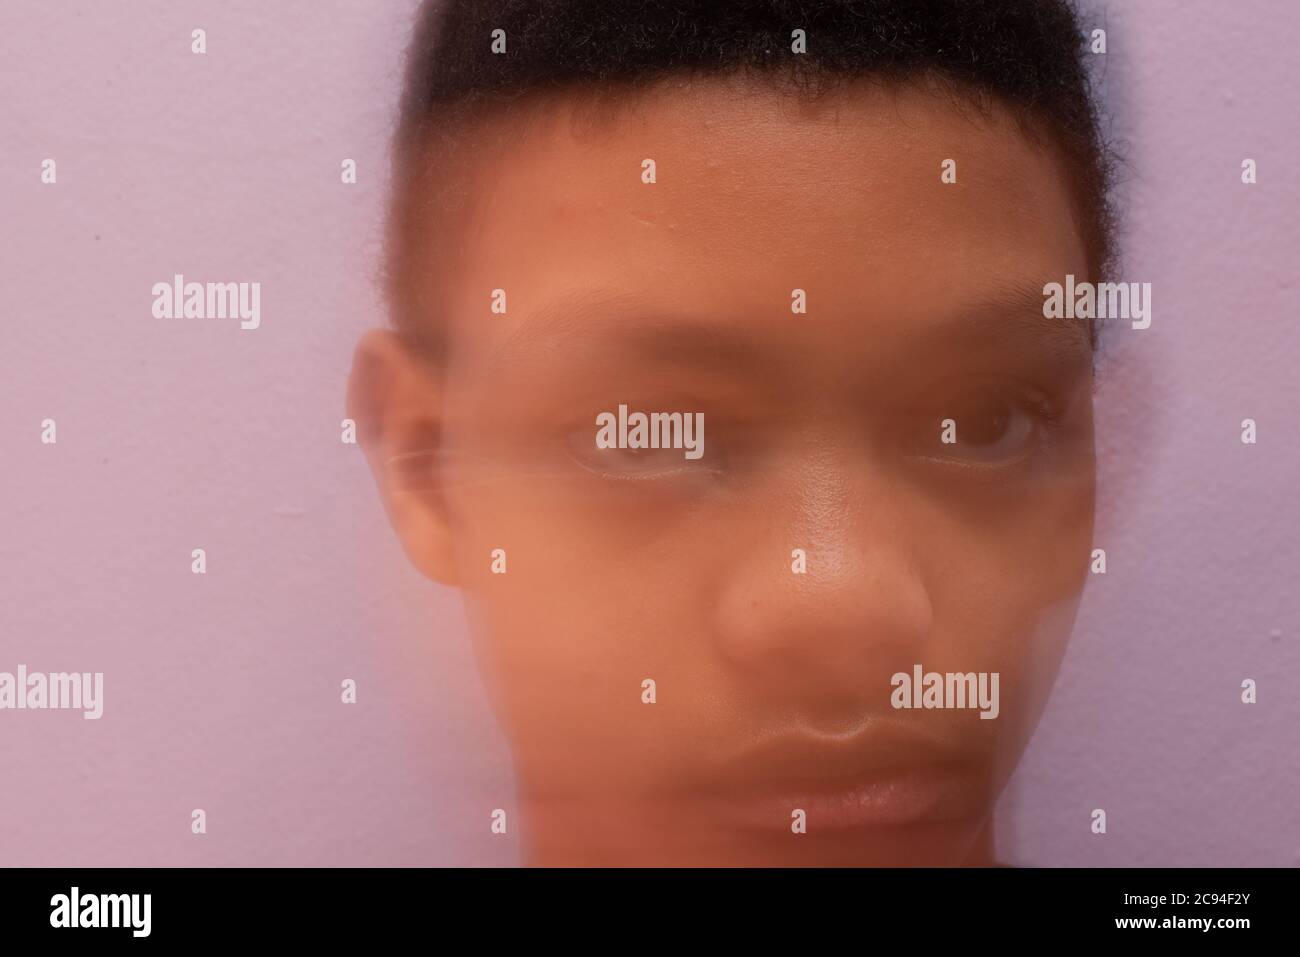 Sad looking teenager shot up close with motion blur Stock Photo